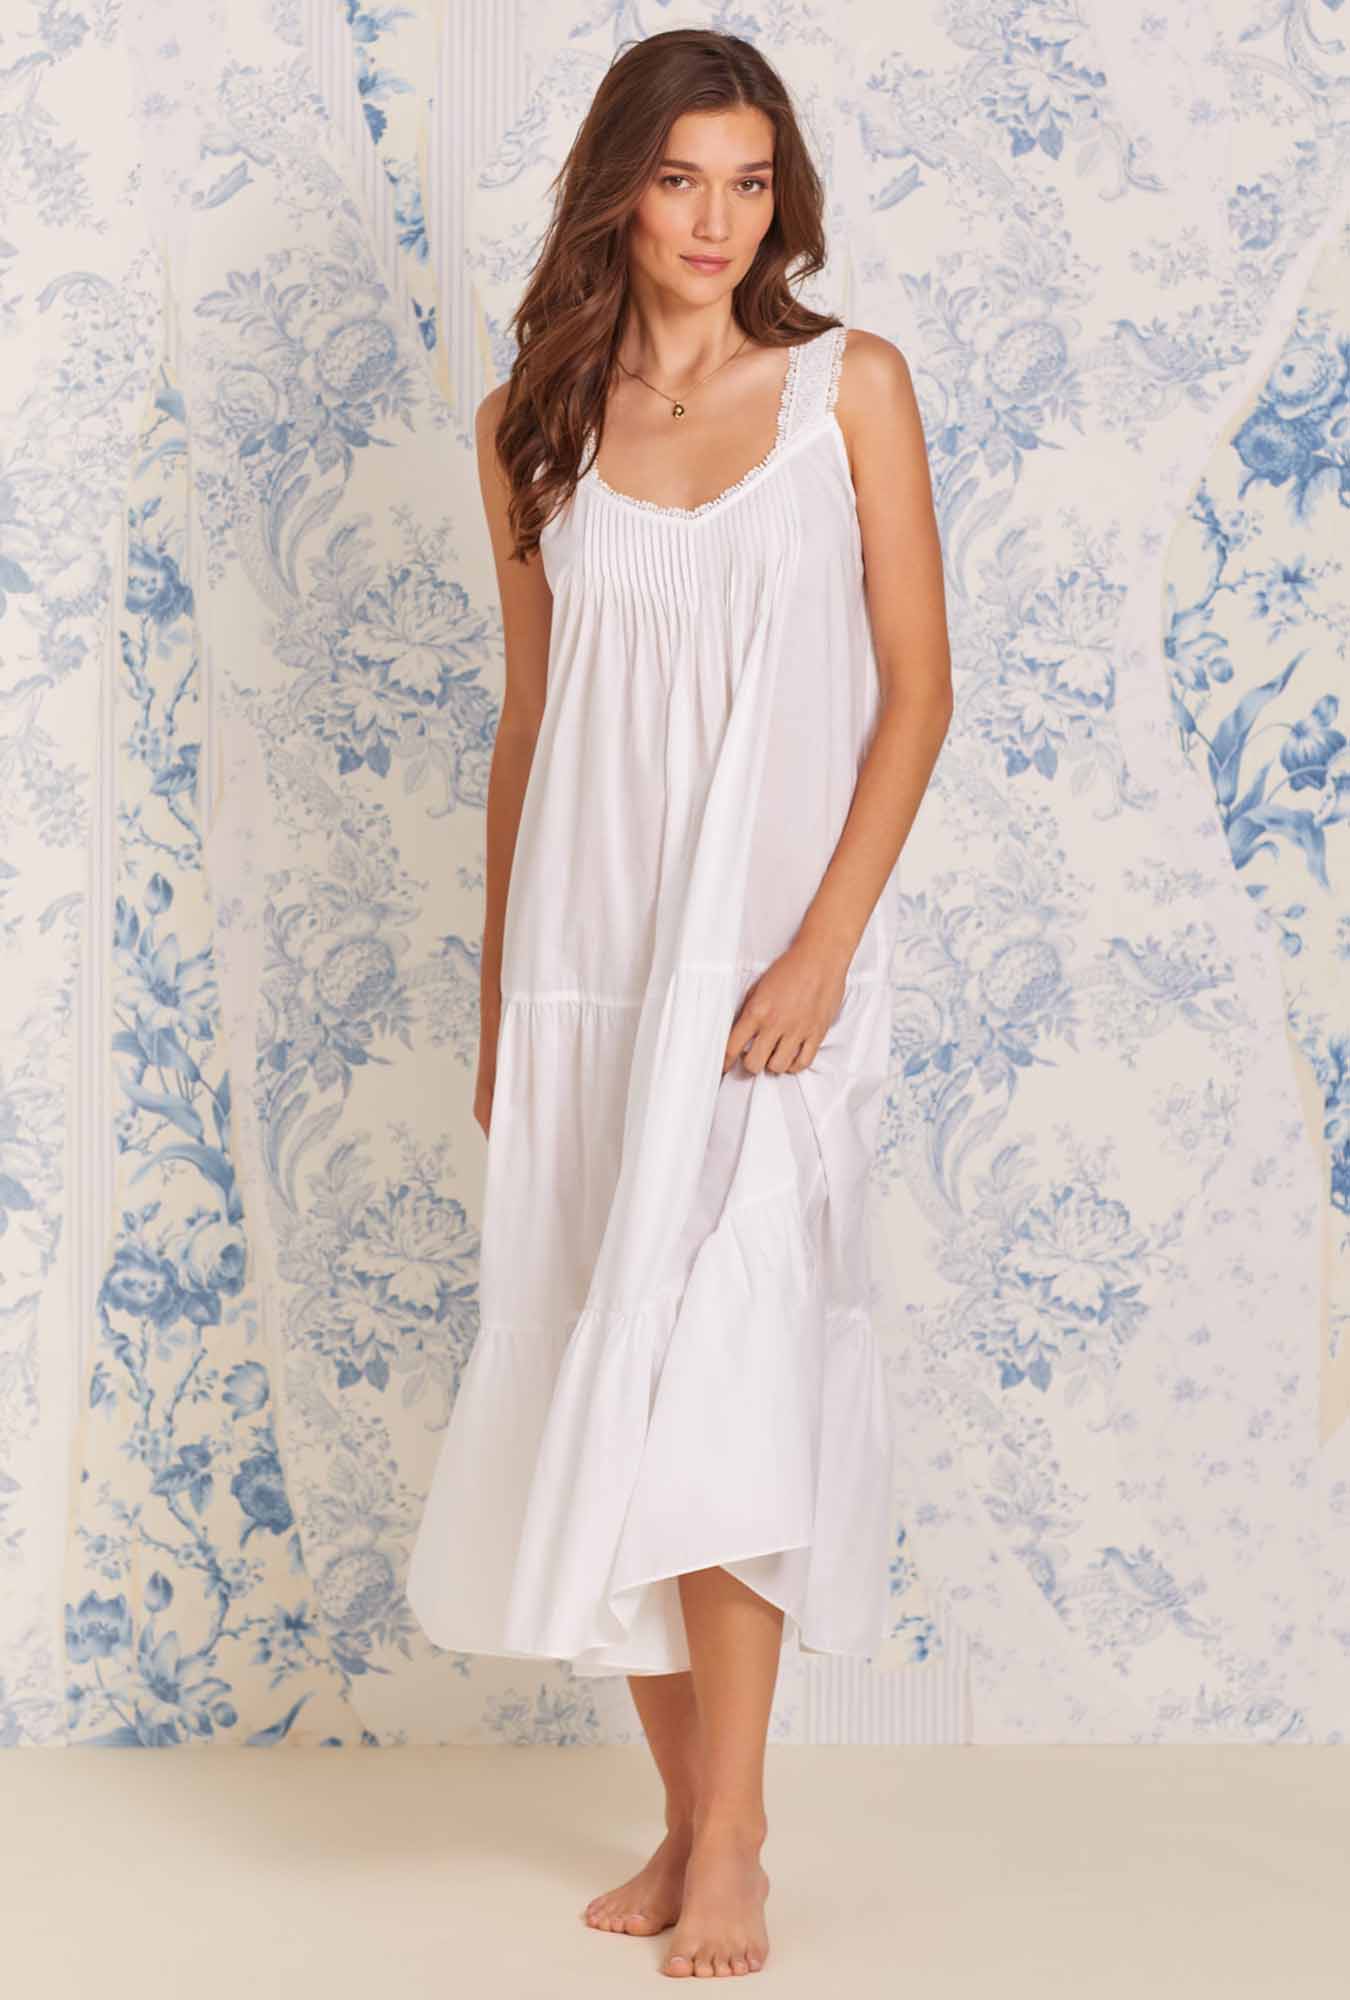 The 1 for U Victorian Nightgown - Womens Nightgowns Cotton, White, XS at   Women's Clothing store